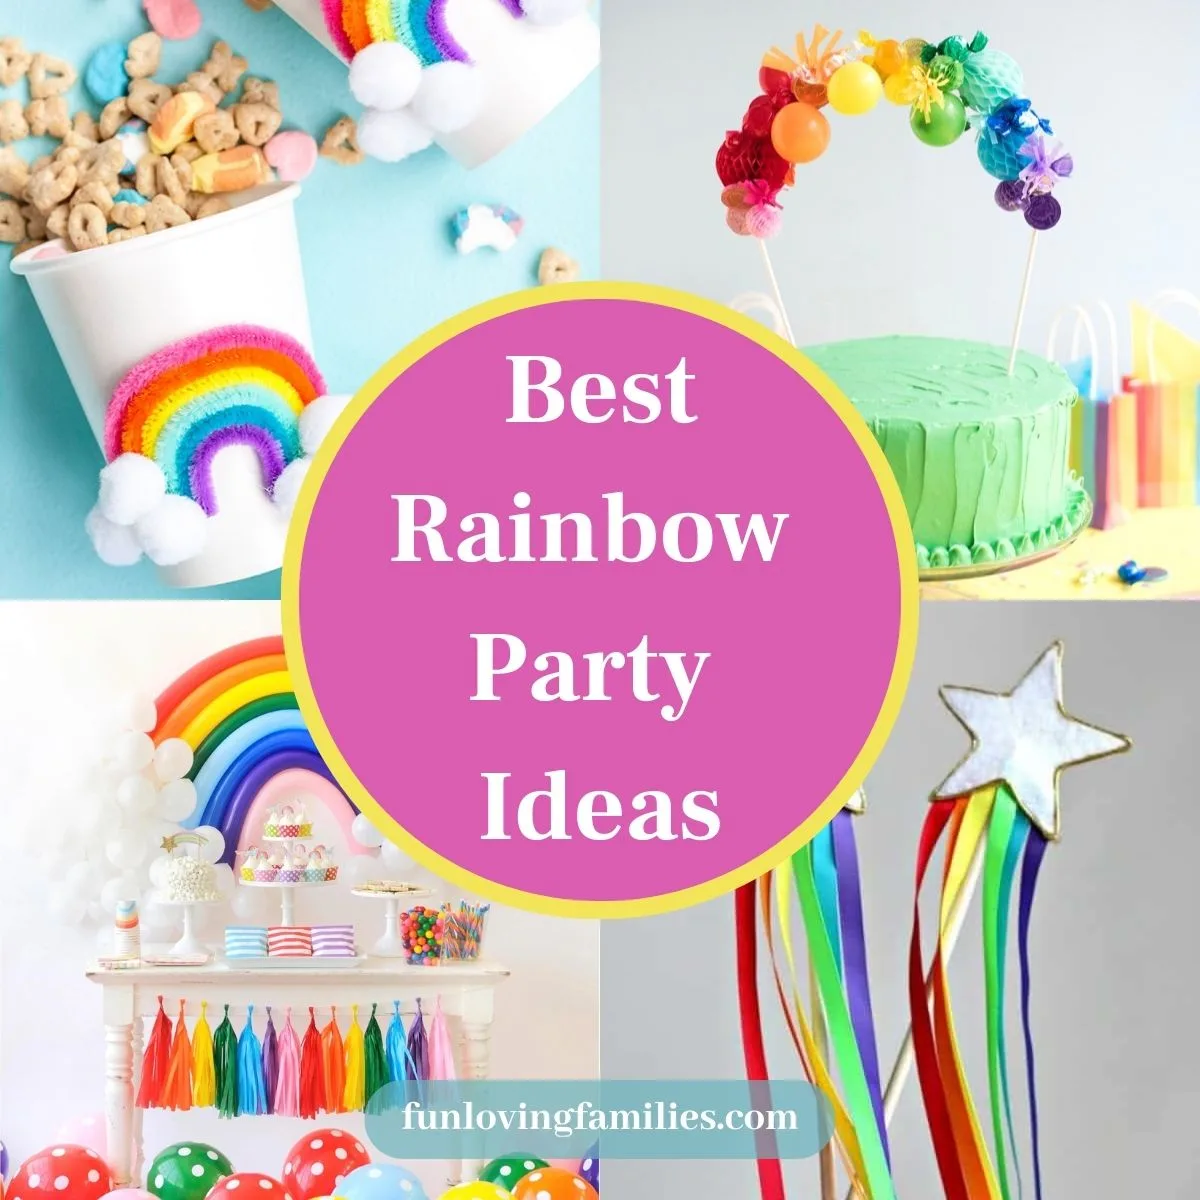 35 Rainbow Party Ideas That Will Knock Your Socks Off - Fun Loving Families